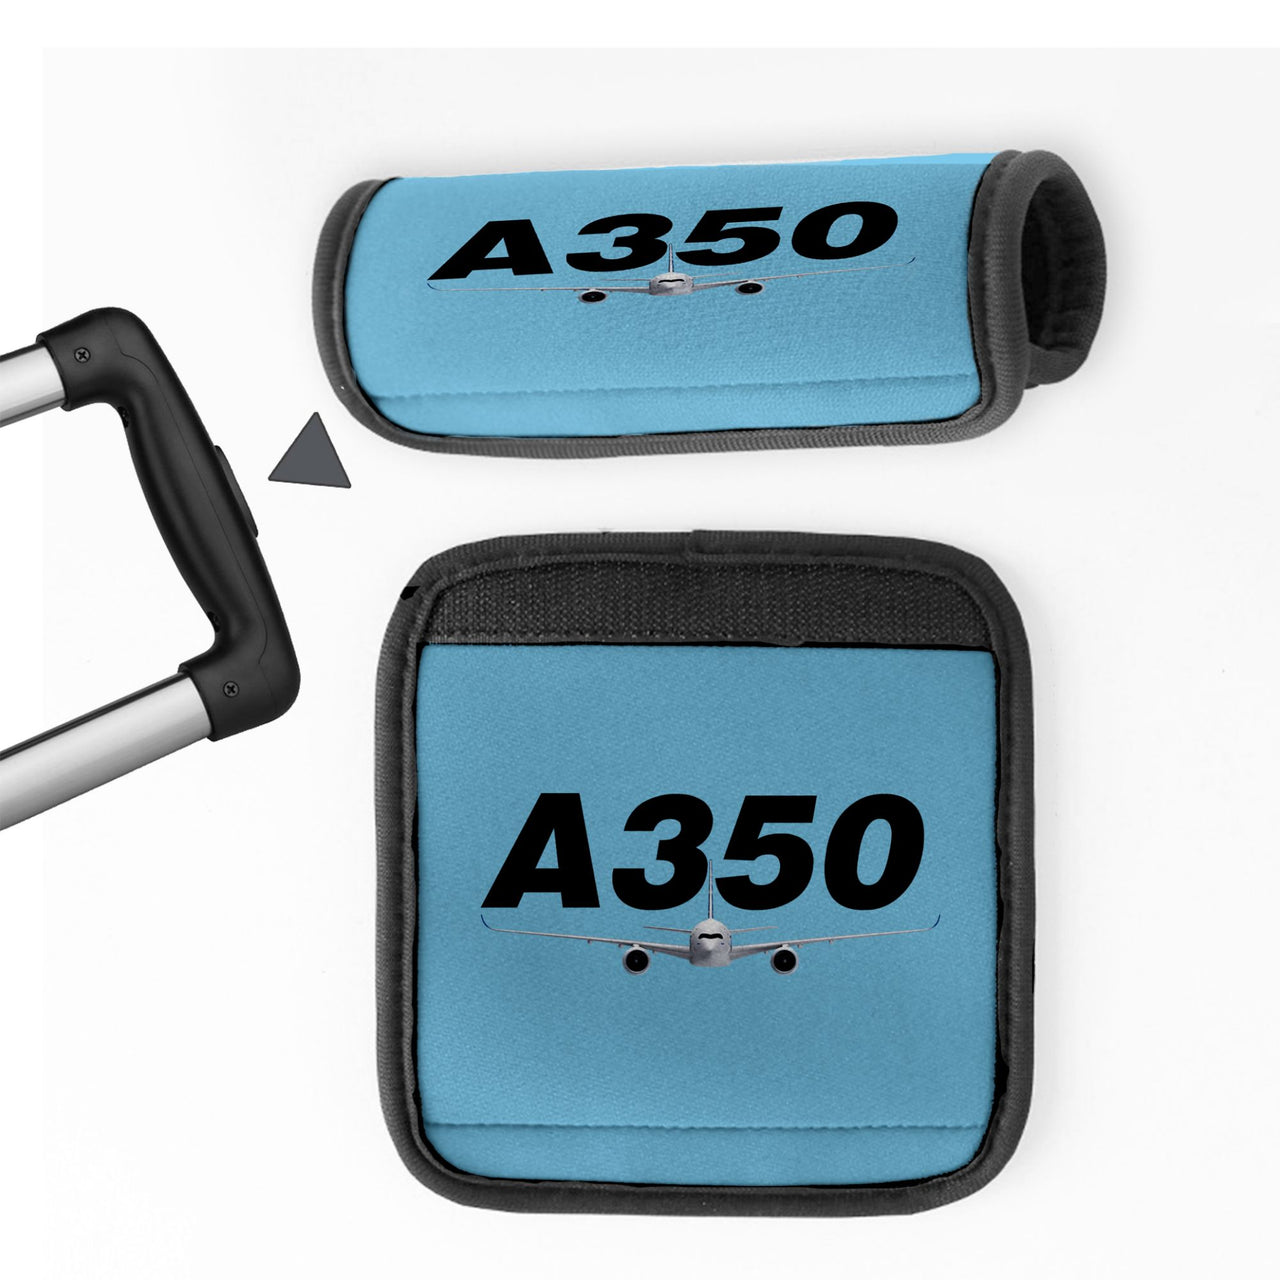 Super Airbus A350 Designed Neoprene Luggage Handle Covers